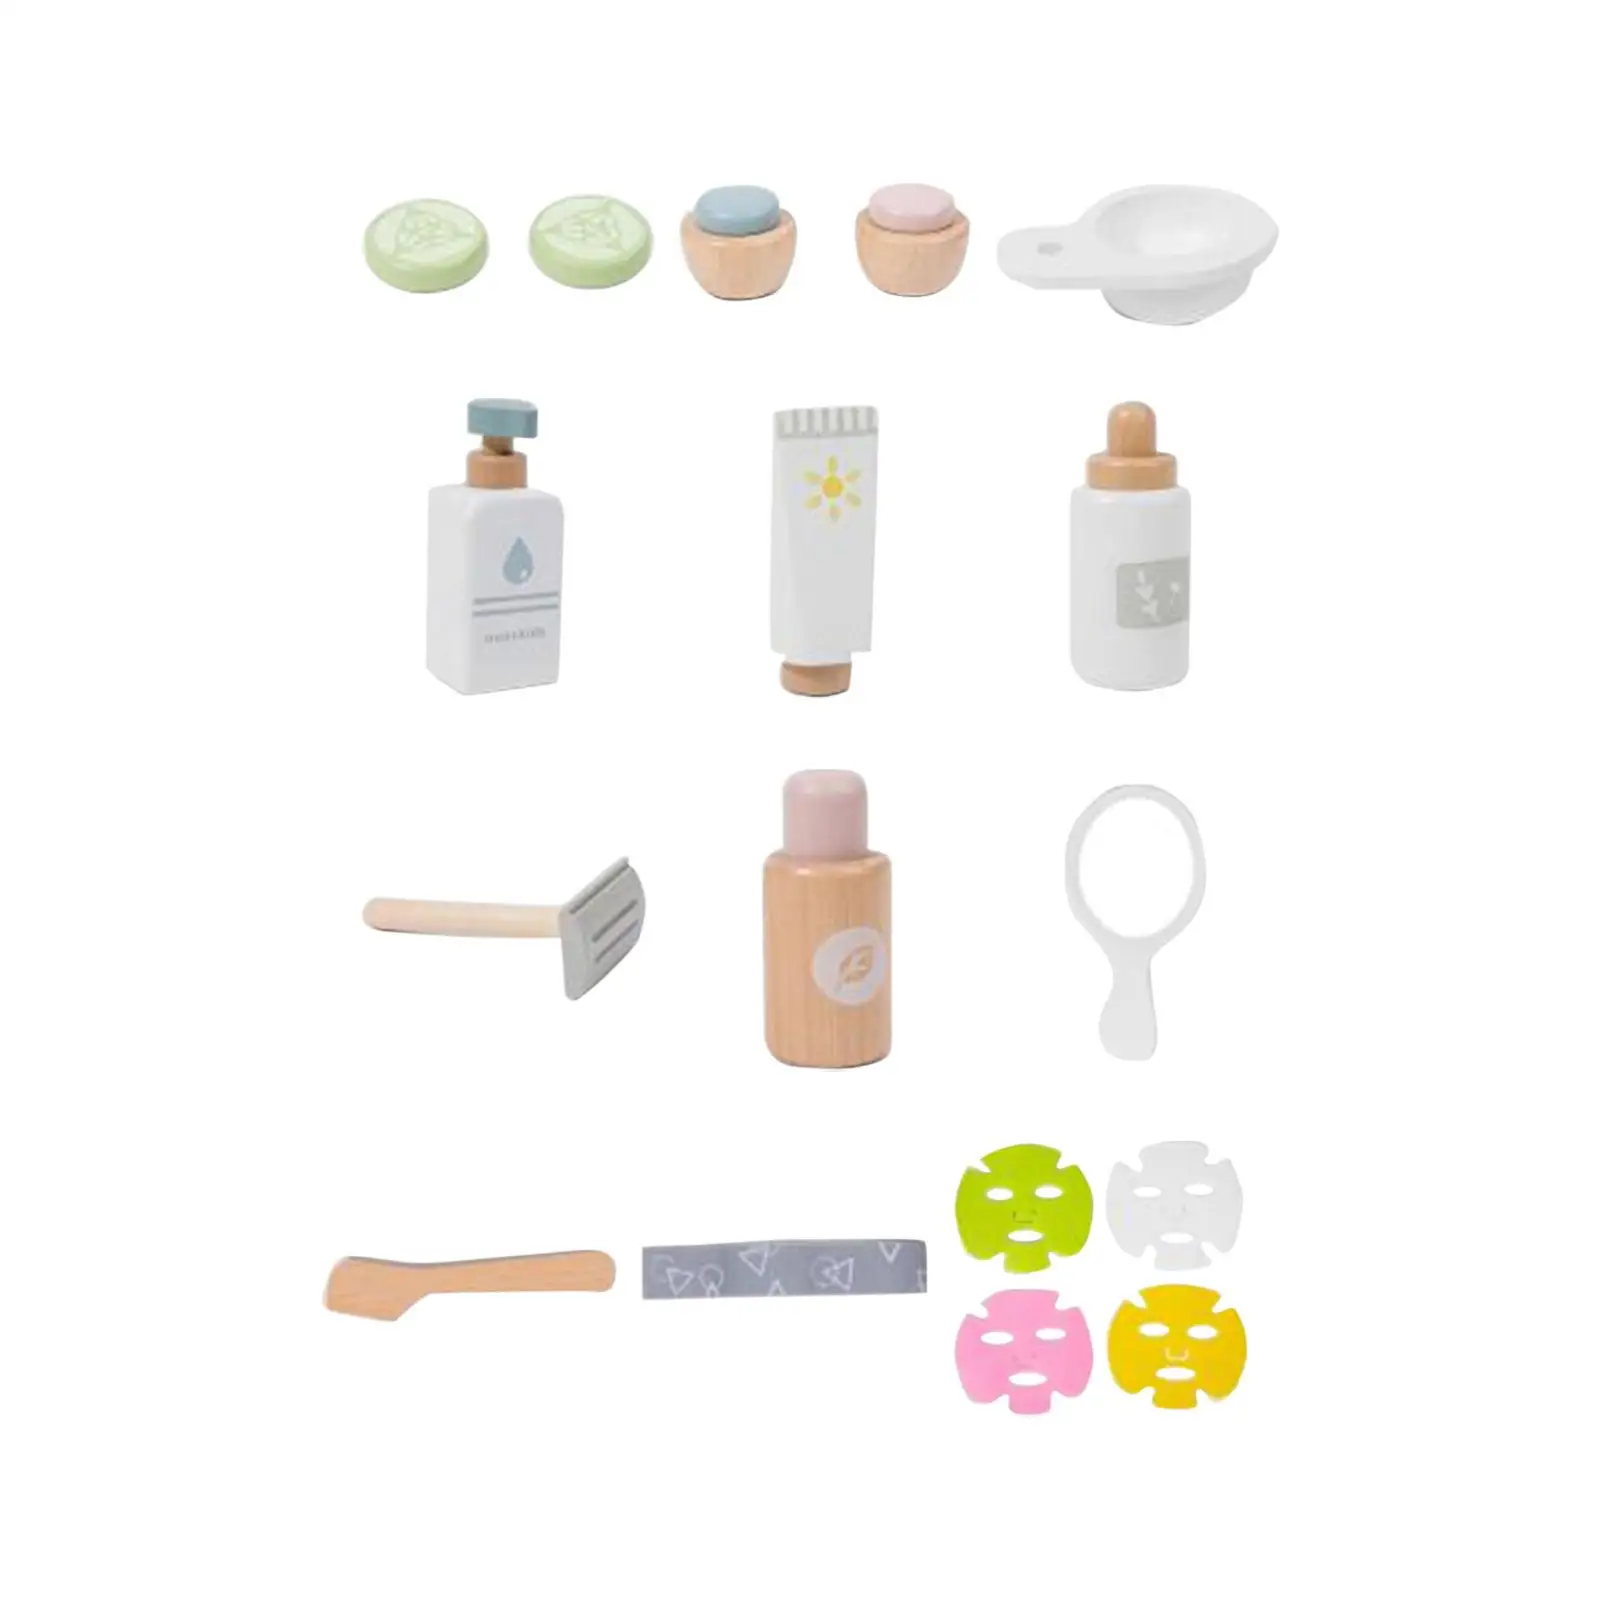 Makeup Toy Kits Role Playing Facial Mask Toy Pretend Makeup Kits for Halloween Present Gift Princess Dress up Kids Children